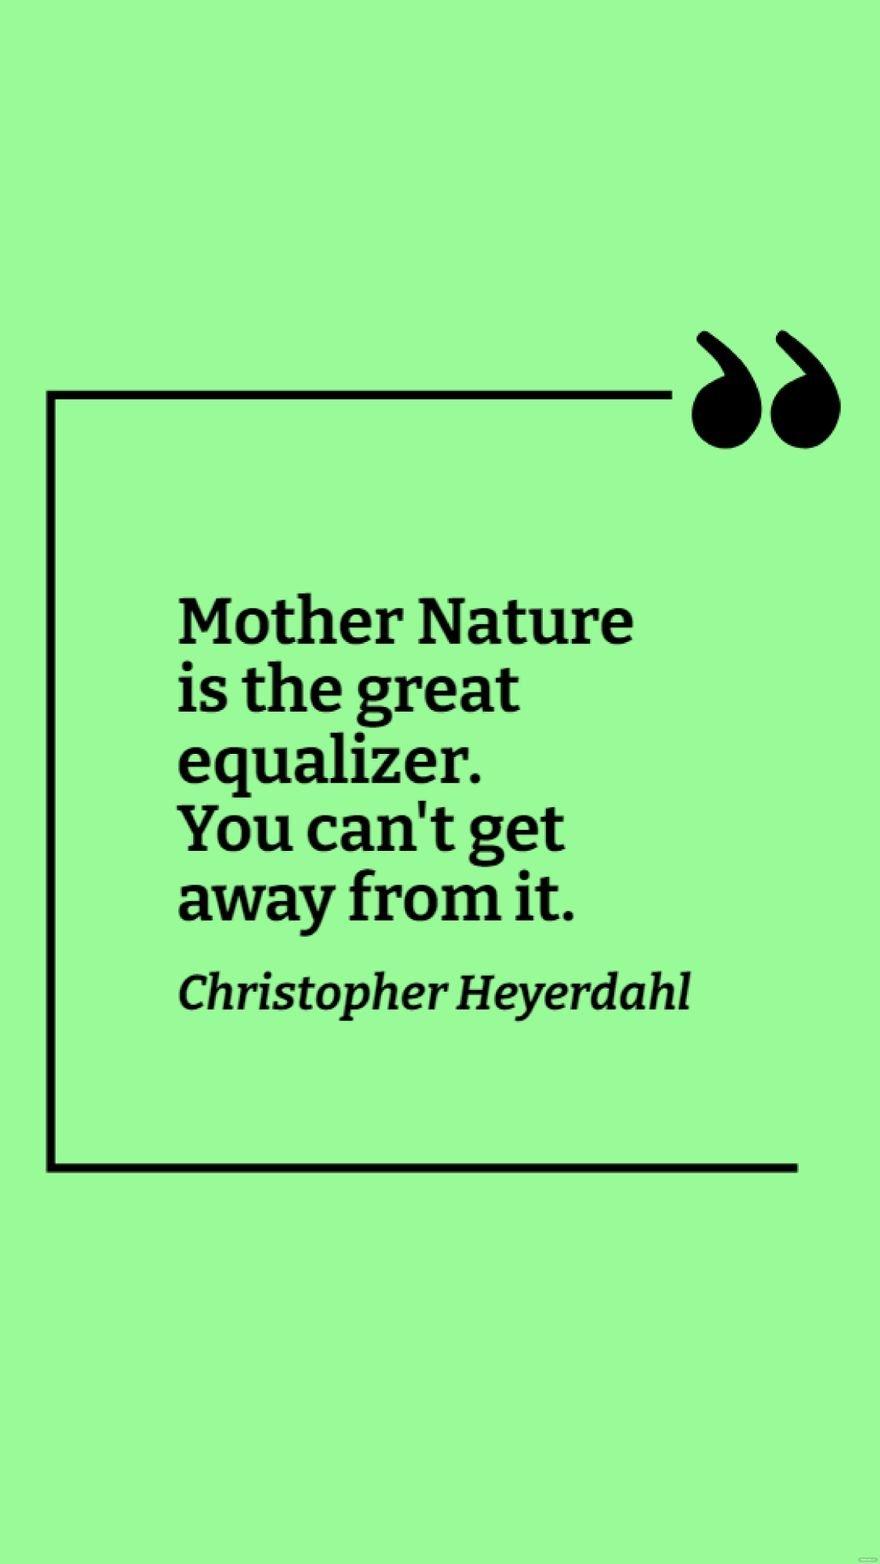 Christopher Heyerdahl - Mother Nature is the great equalizer. You can't get away from it.